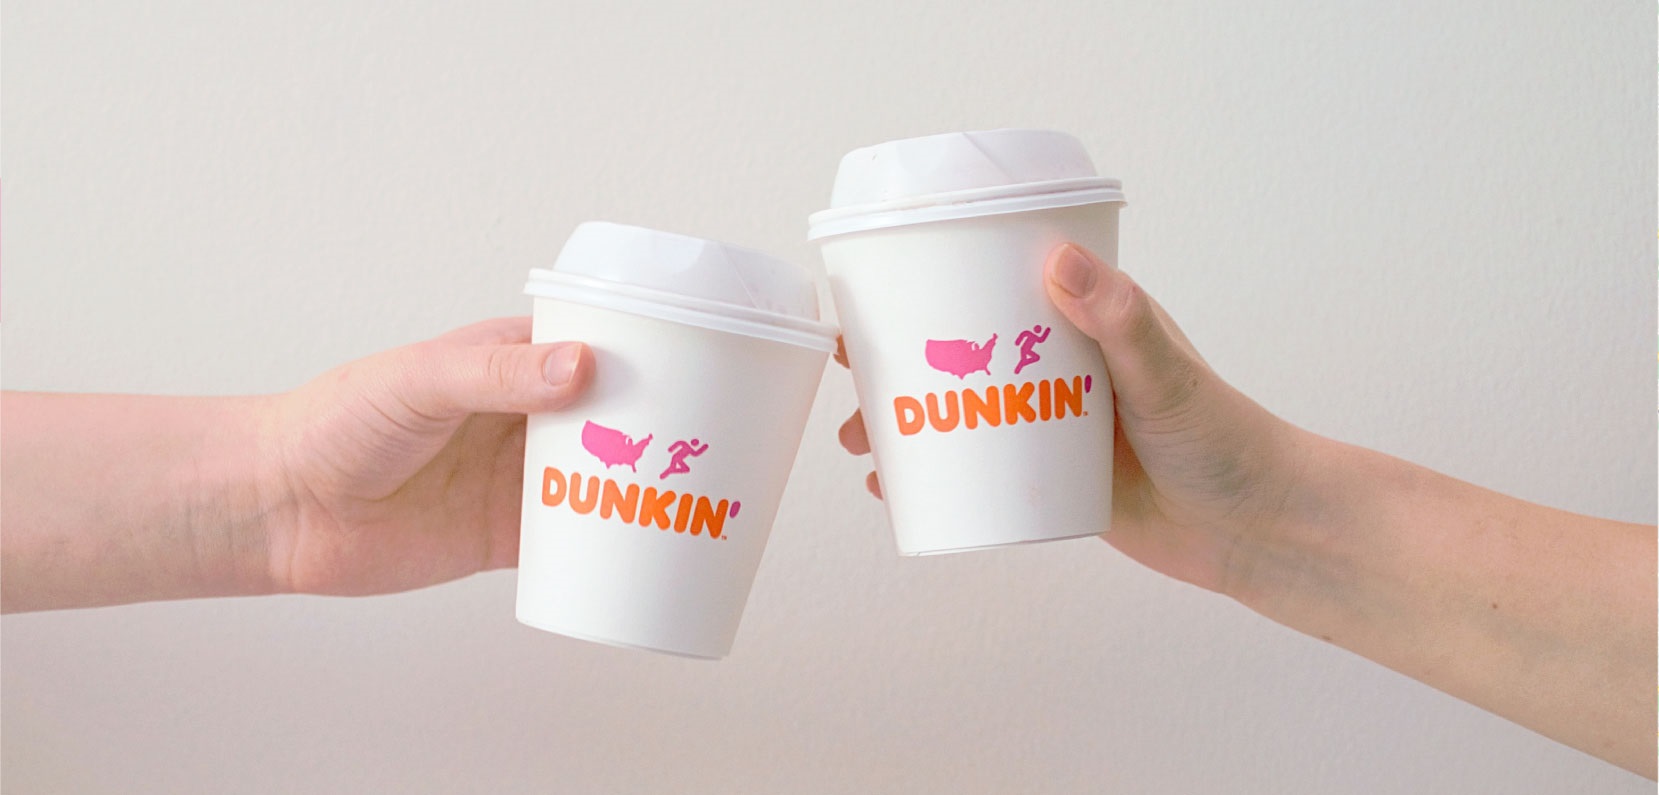 Dunkin' increased store traffic by testing Google Maps